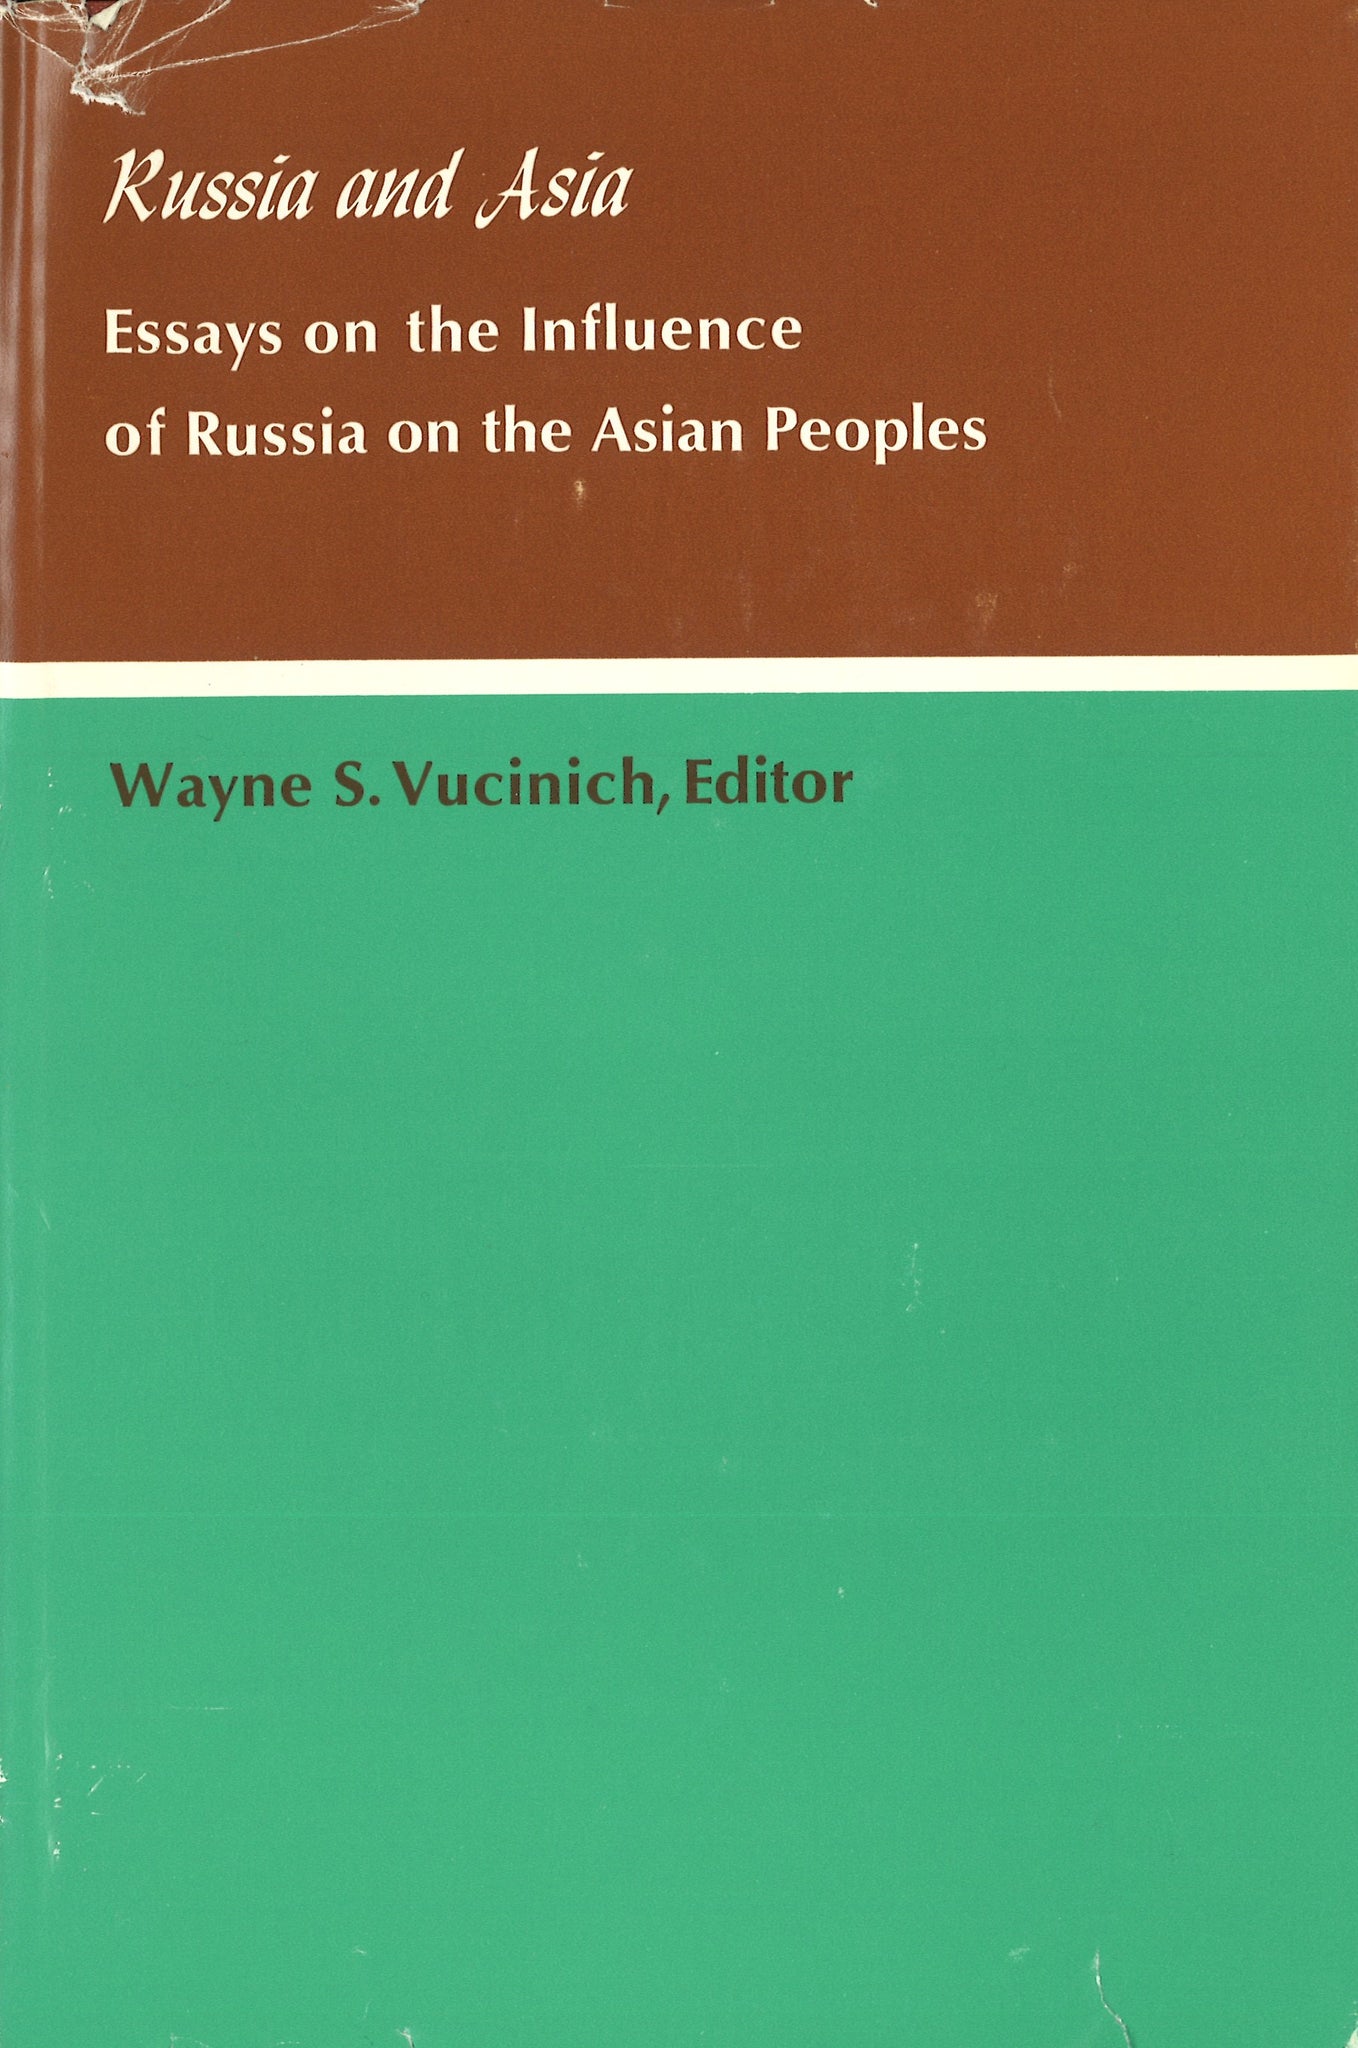 Russia and Asia: Essays on the Influence of Russia on the Asian Peoples